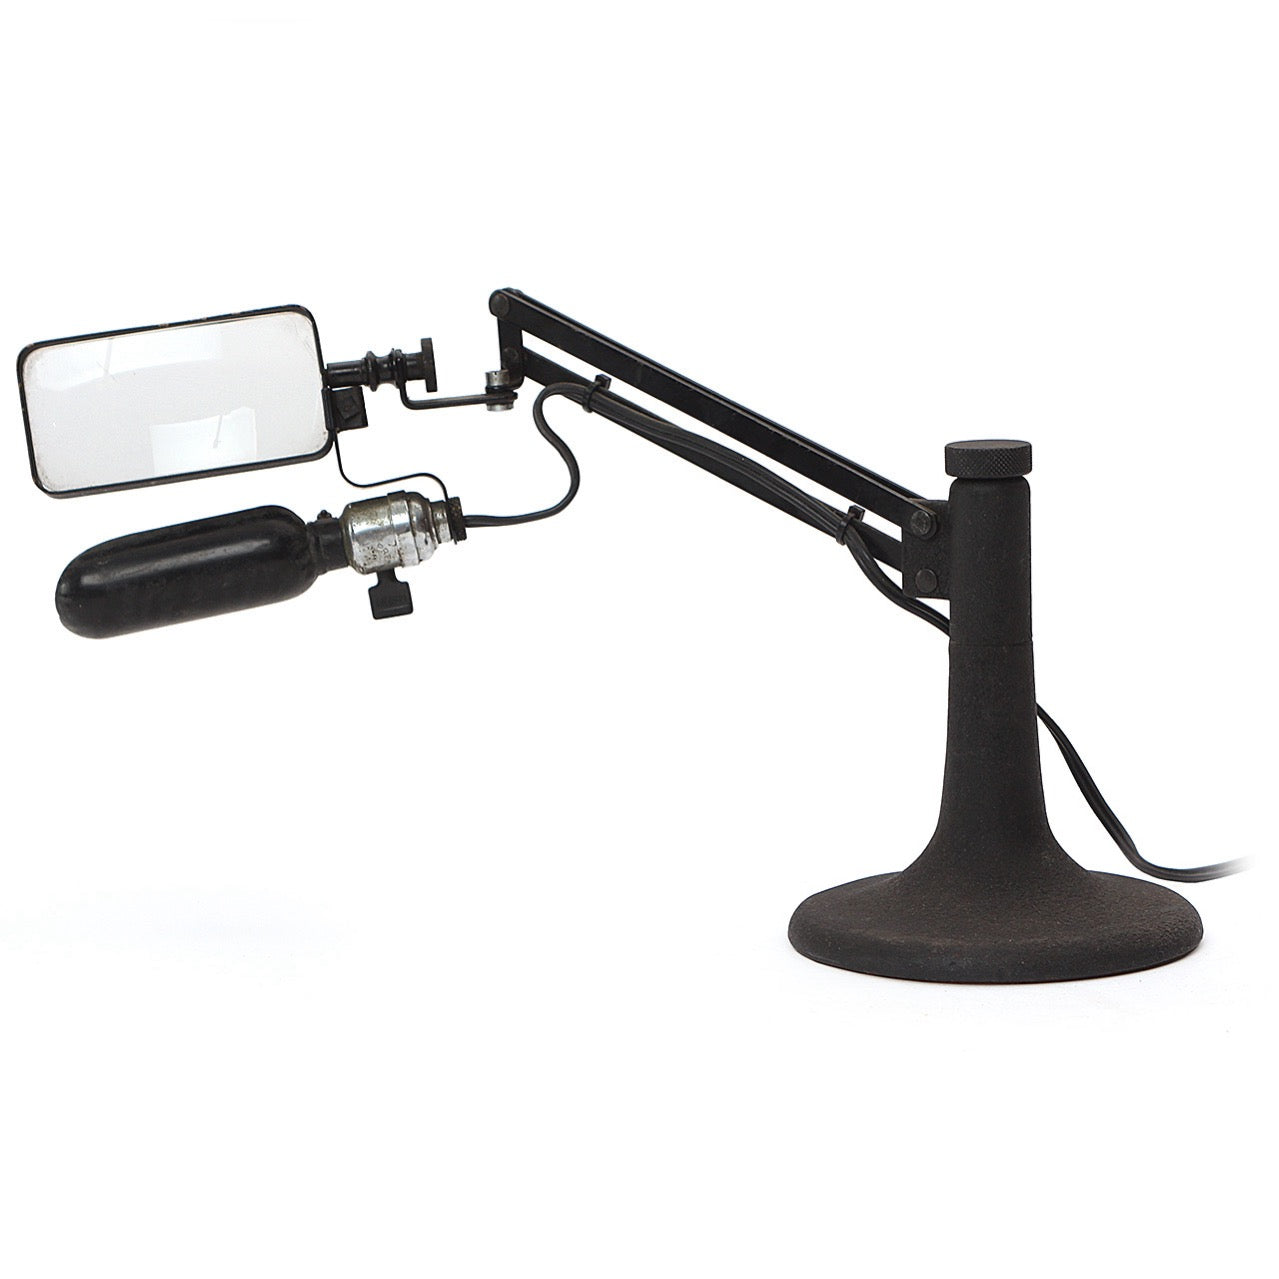 Desk Lamp with Magnifying Lens by Bausch & Lomb